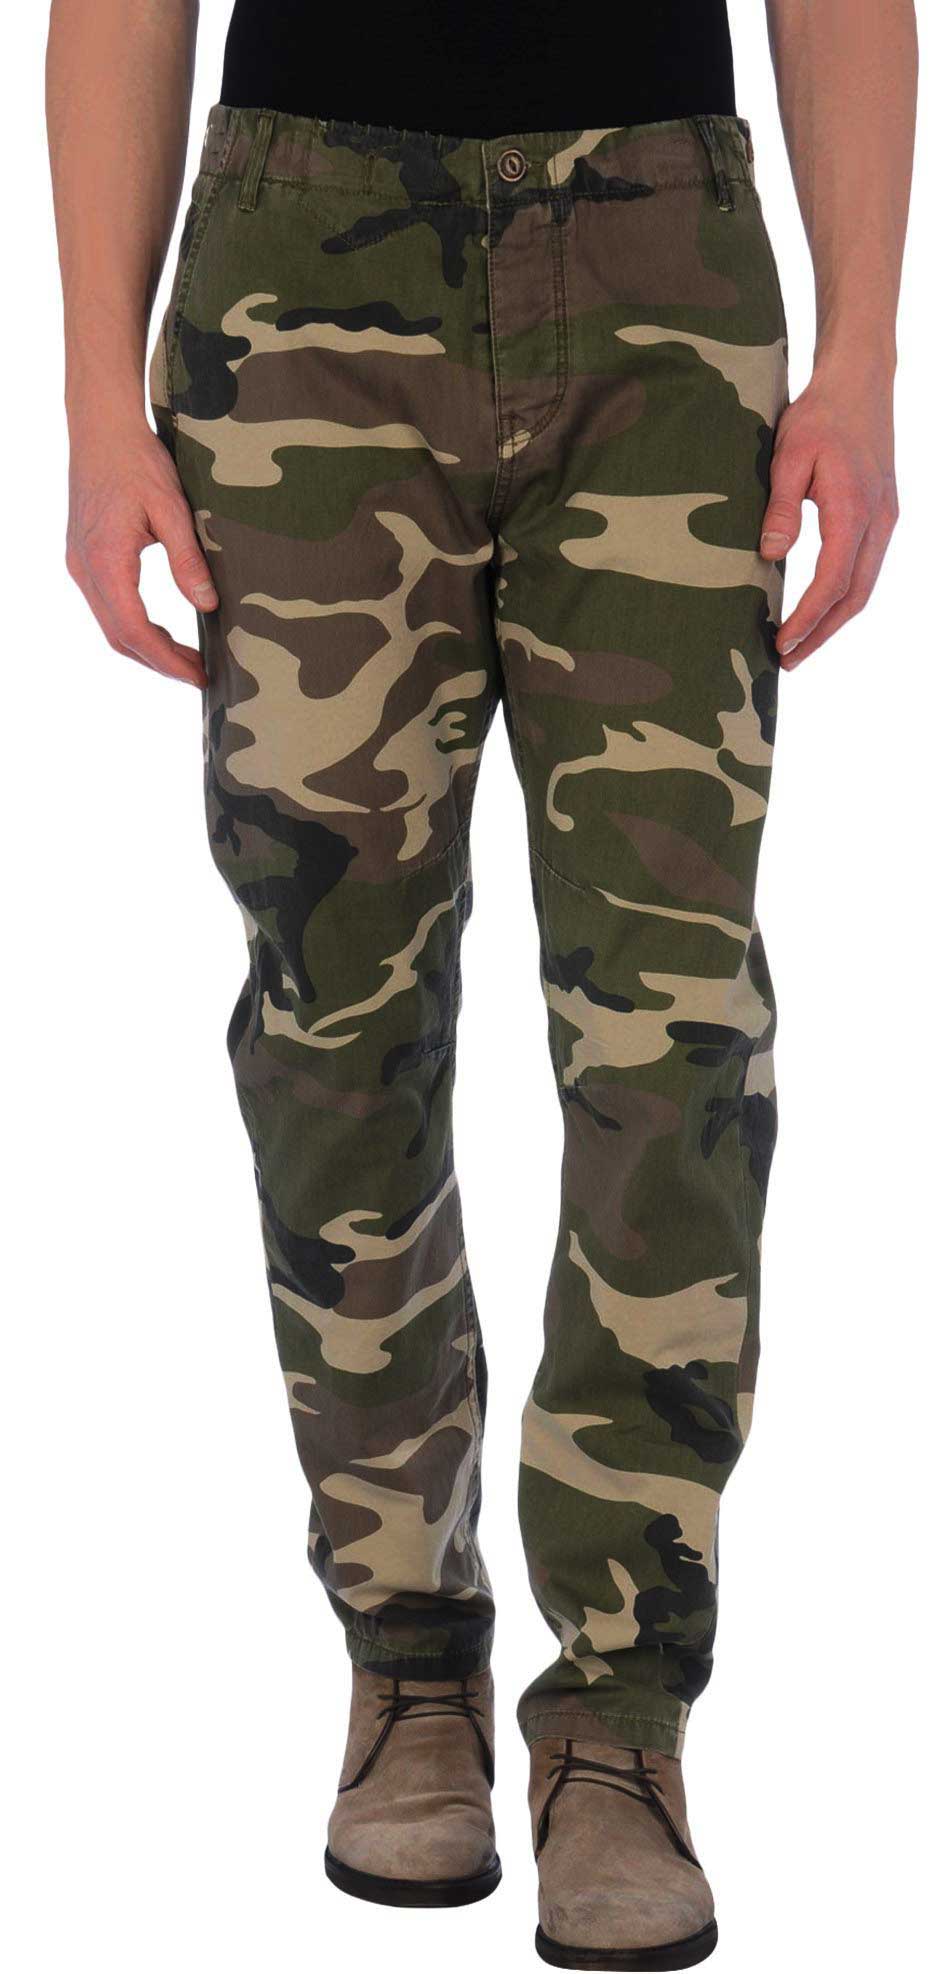 Camouflage Pants camouflage pants NBXXRFP